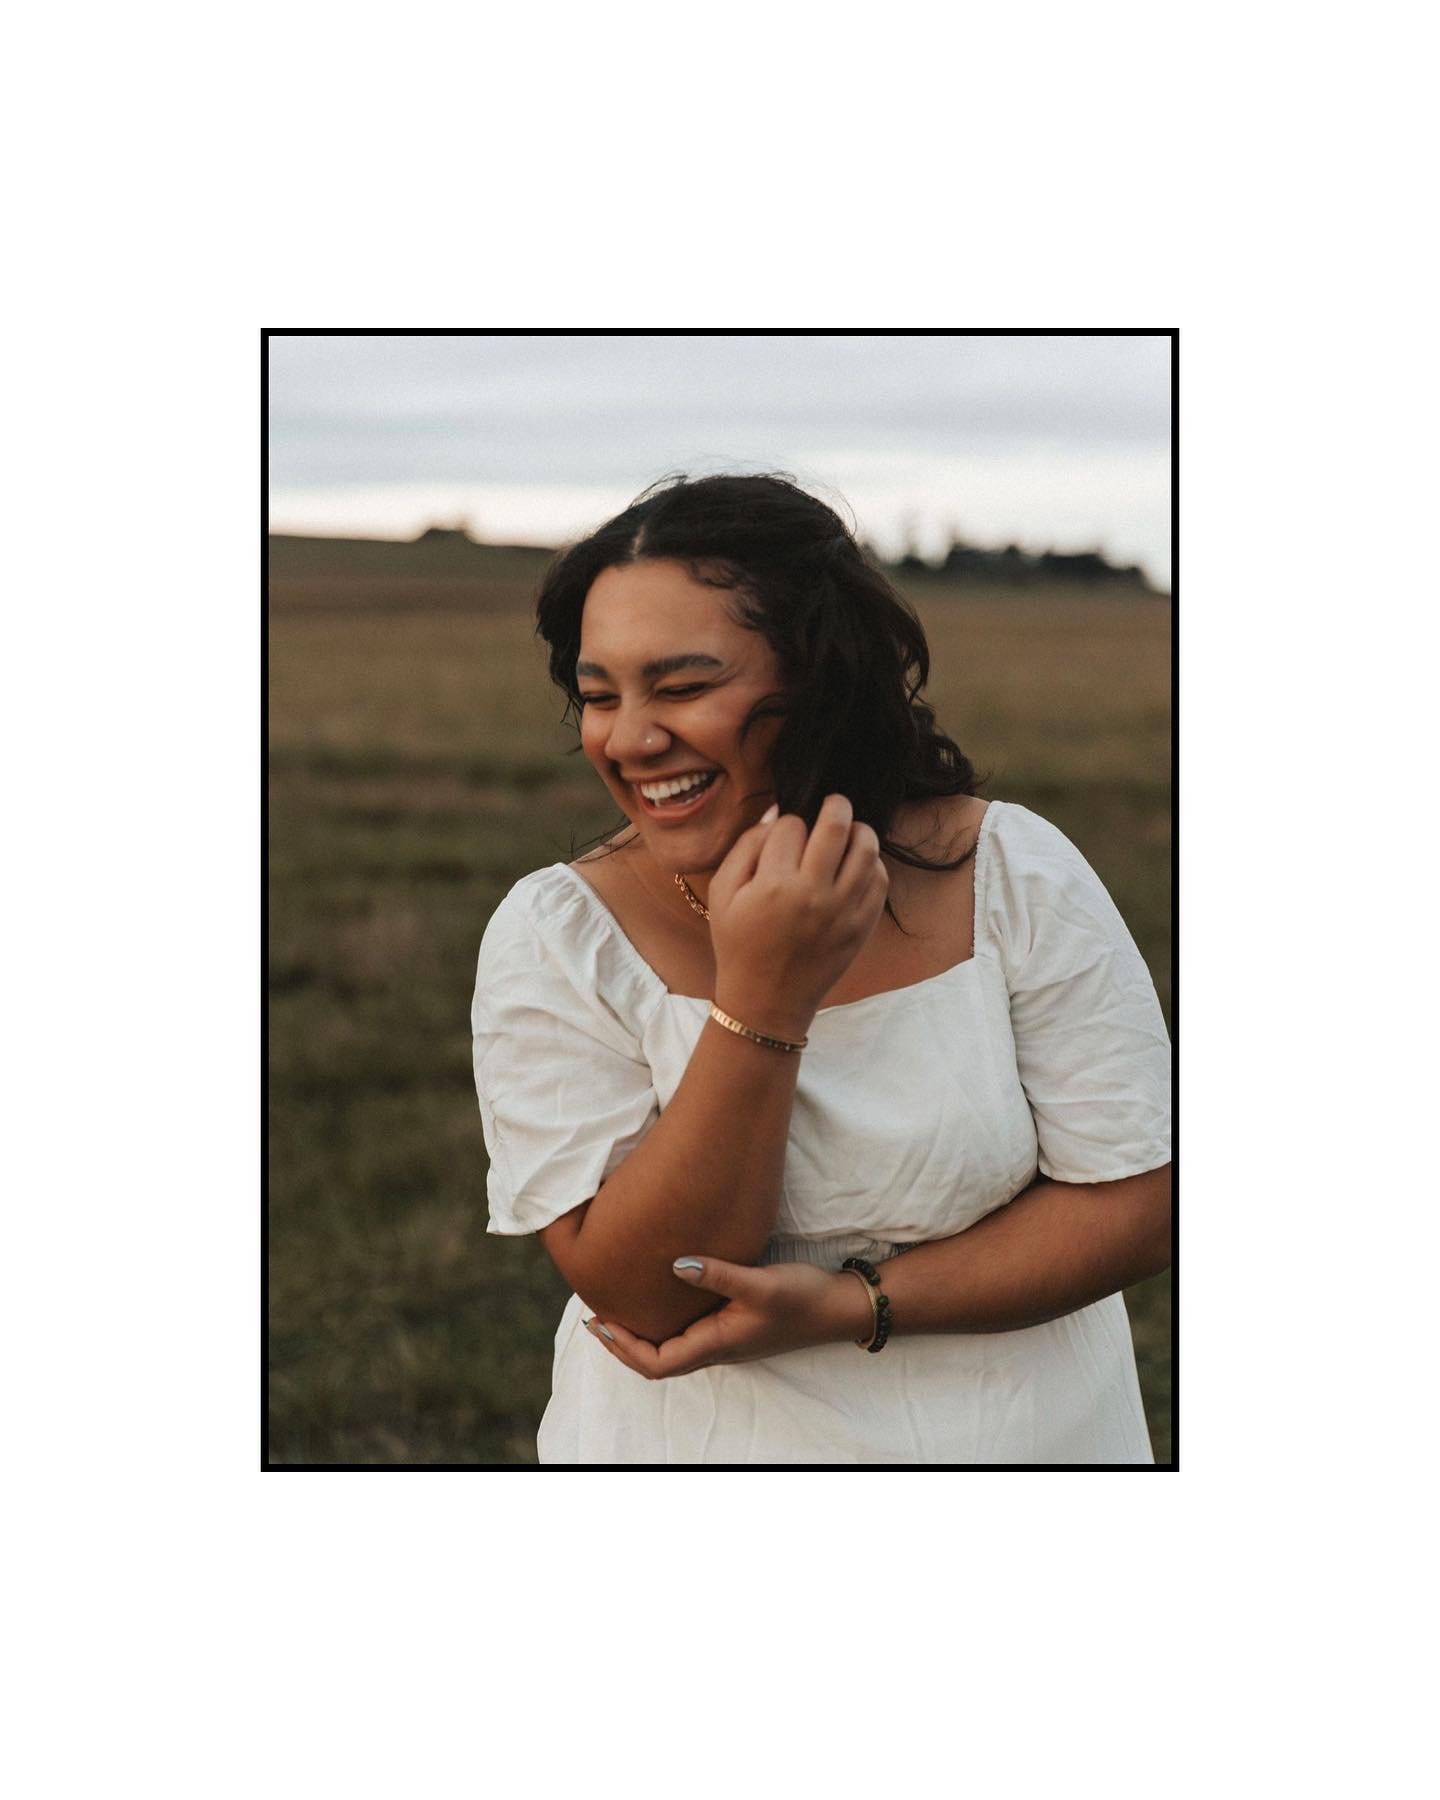 Moments before Mr. Darcy walked across the field to declare his love for us 🥰

-

Portraits. Portrait photographer. Portrait photography. Portrait session. Creative portraits. Washington photographer. Seattle photographer. Seattle portraits. Grad ph